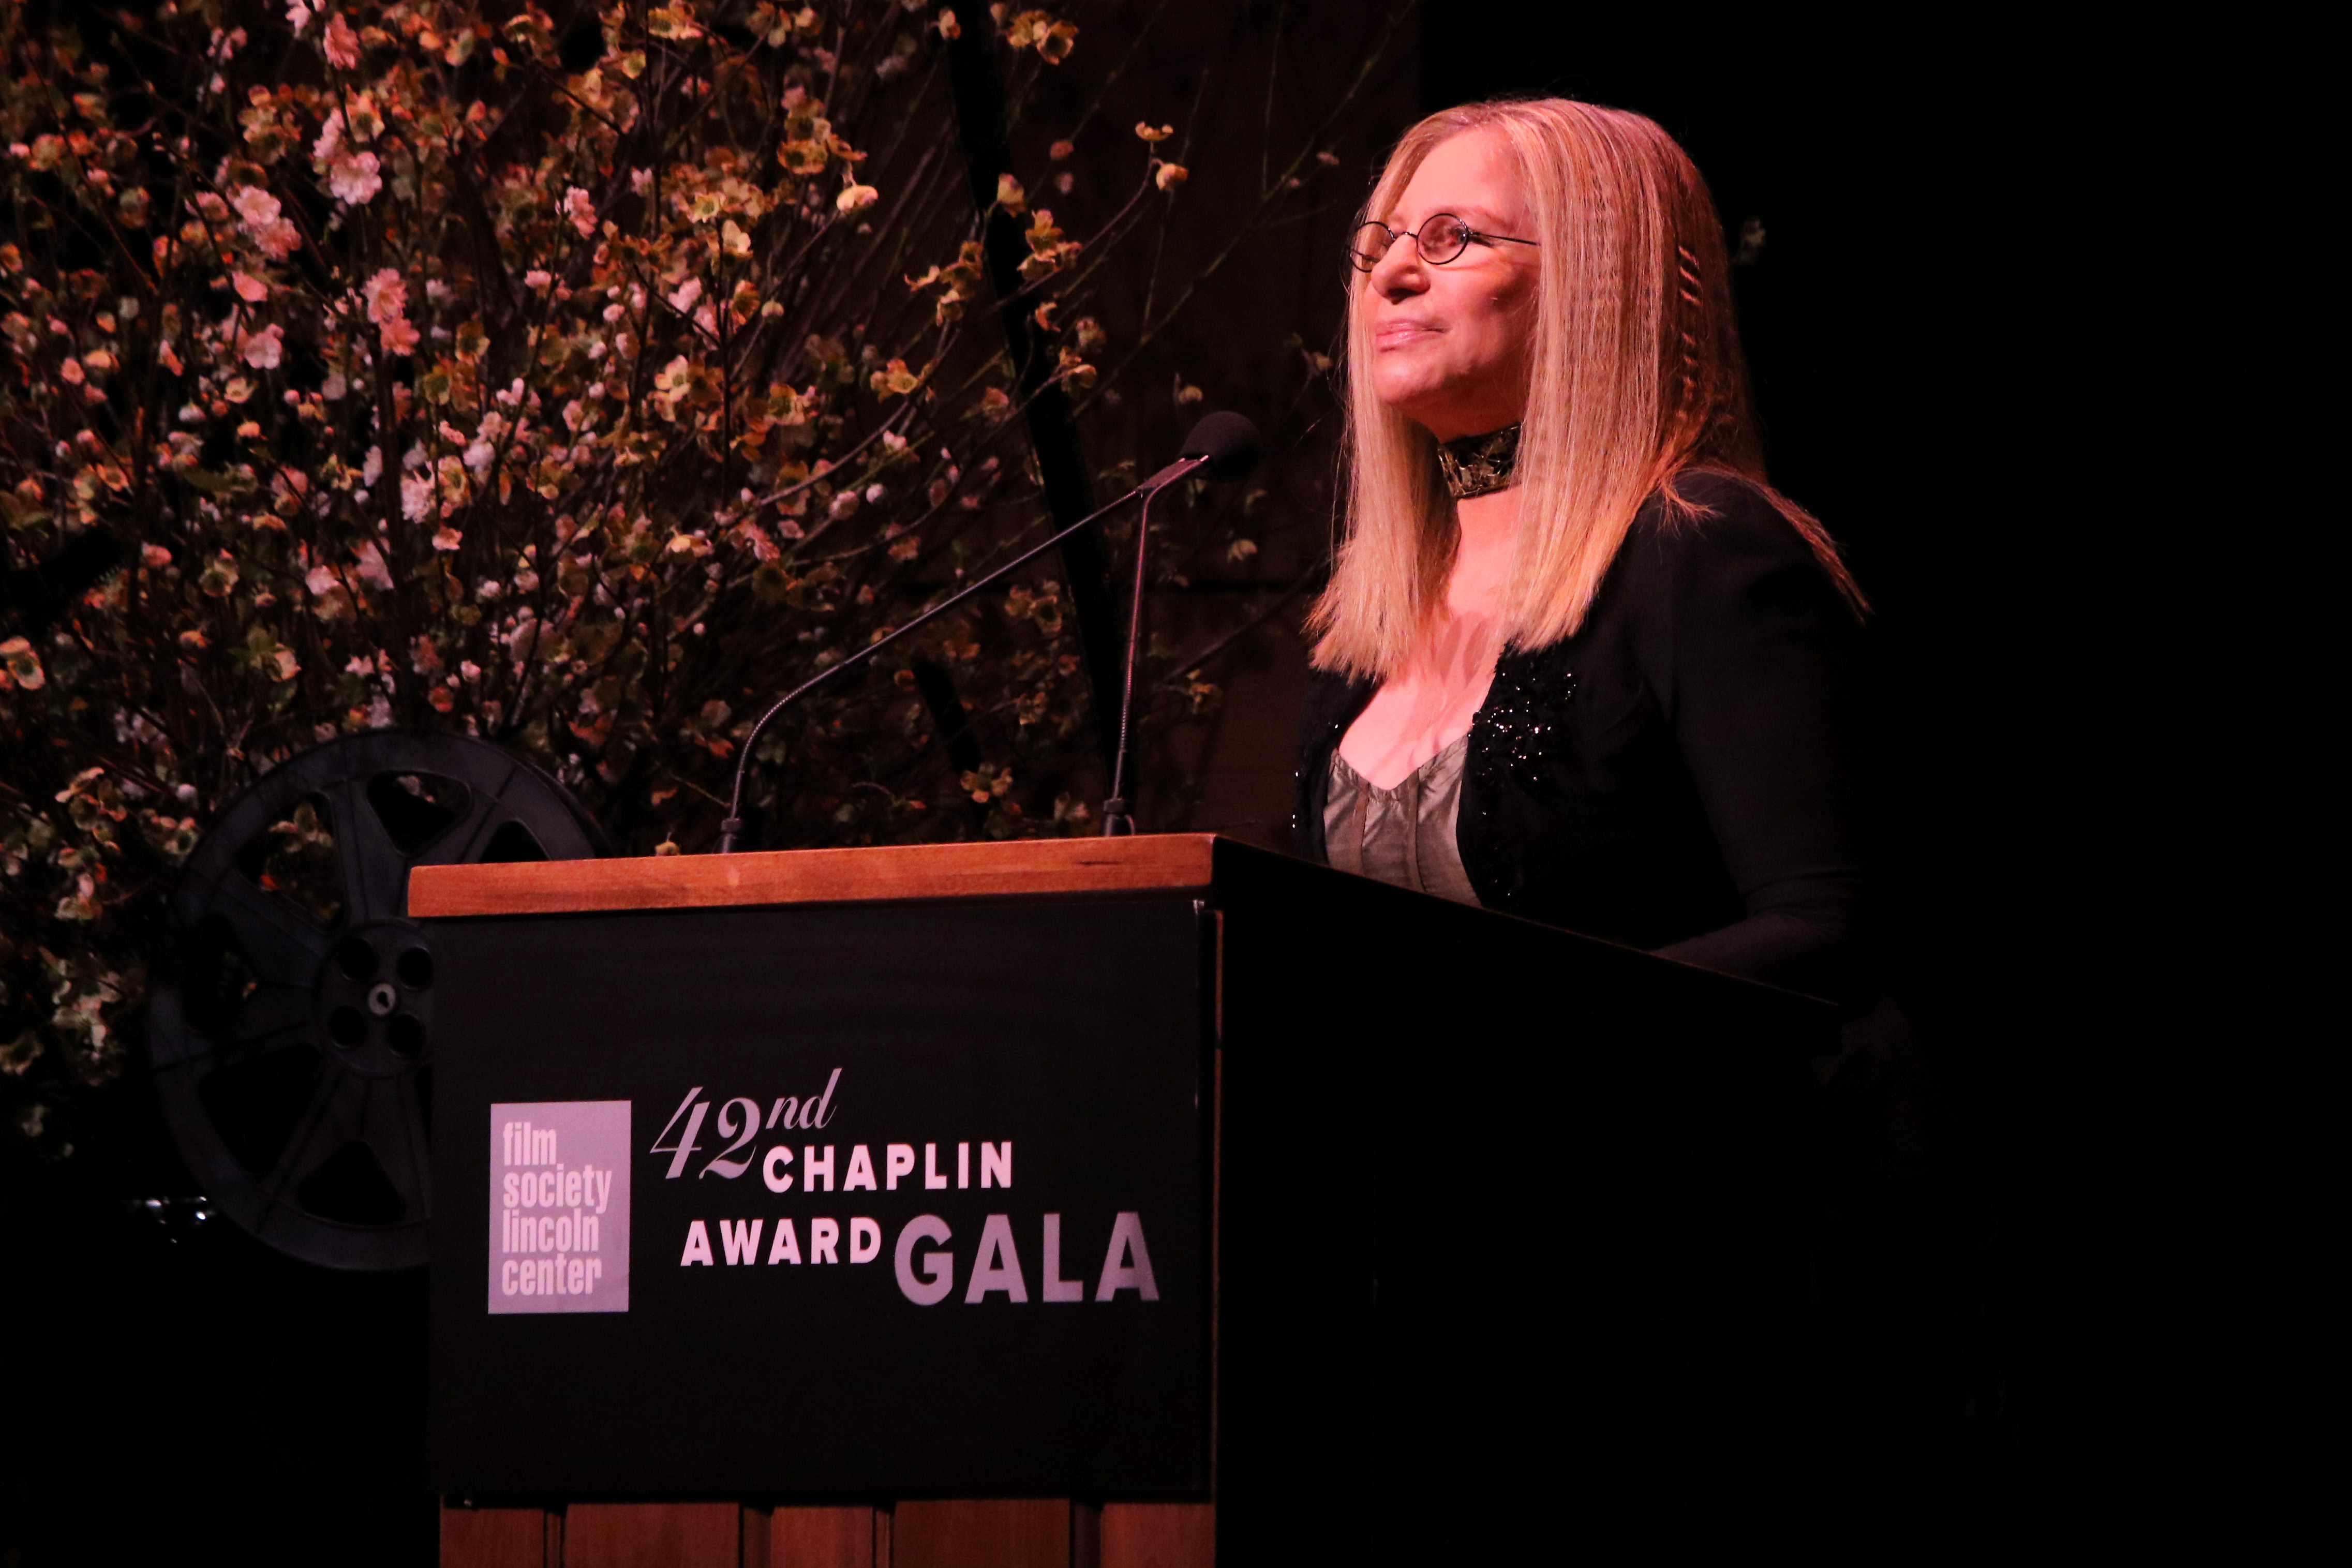 NEW YORK, NY - APRIL 27:  (EXCLUSIVE COVERAGE) Barbra Streisand speaks onstage at the 42nd Chaplin Award Gala at Alice Tully Hall, Lincoln Center on April 27, 2015 in New York City.  (Photo by Jim Spellman/WireImage) (Jim Spellman&mdash;WireImage)